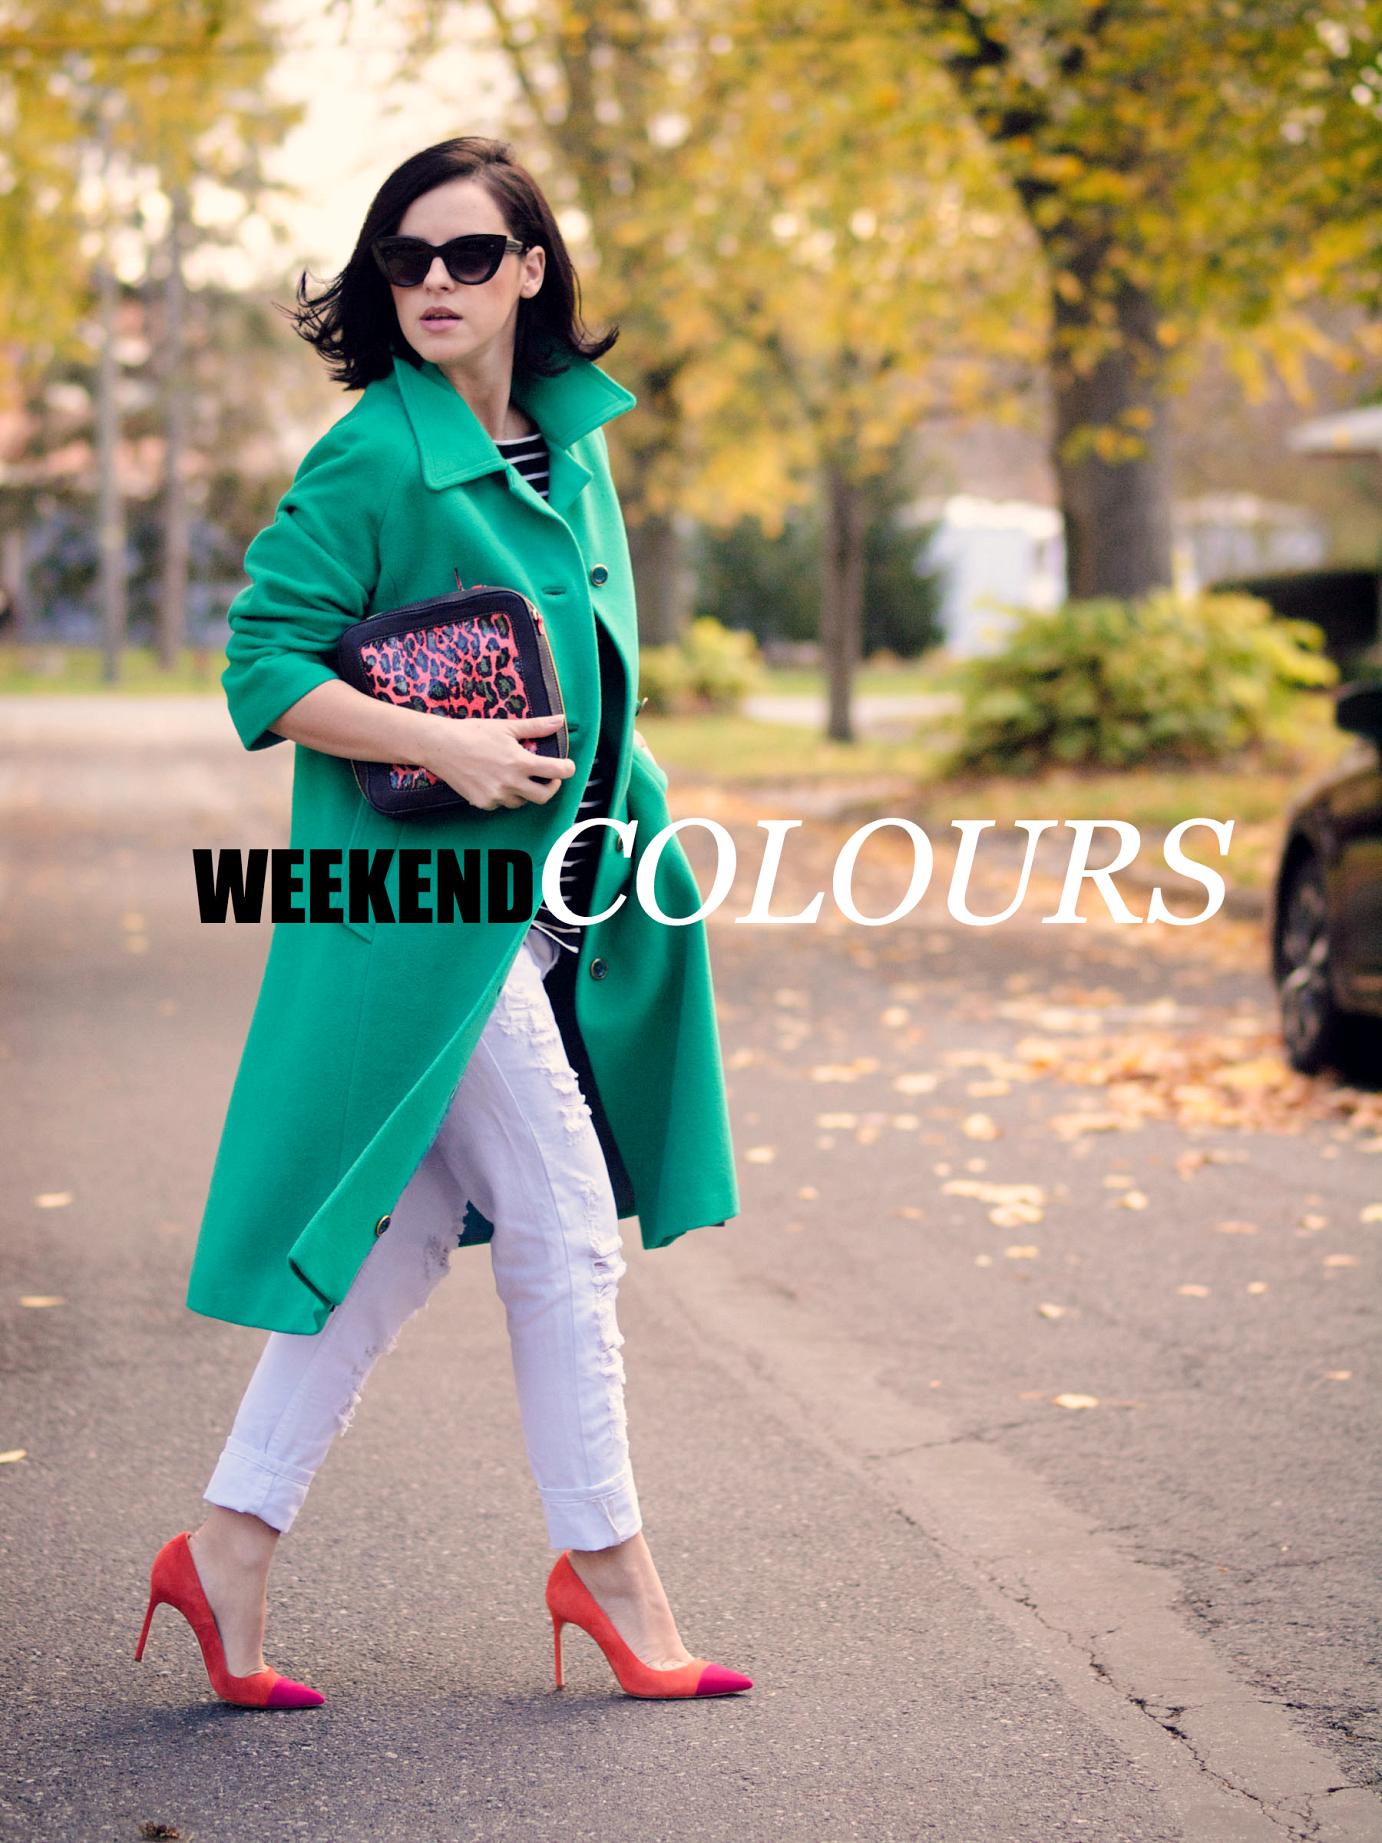 bittersweet colours, street style, fall coats, fall colors, fall trends, fall street style, Manolo Blahnik shoes, meredith wendell, stripes, boyfriend jeans, eye cat sunglasses, maternity style, bump style, 21 weeks,